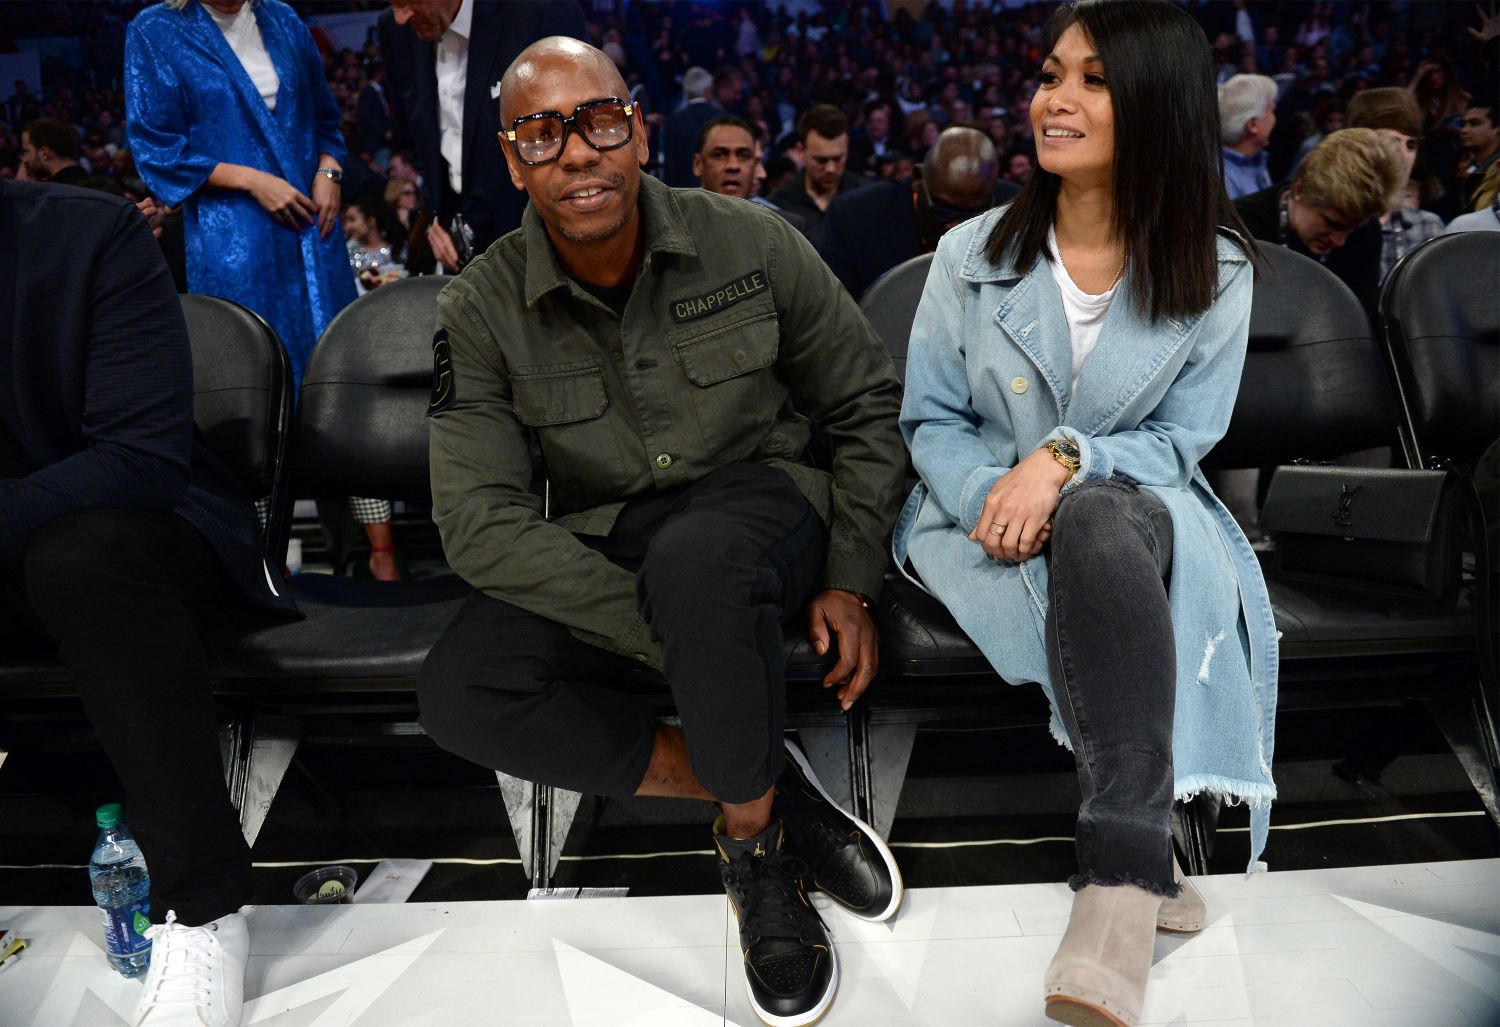 Dave Chappelle and his wife Elaine sitting courtside at a basketball game.